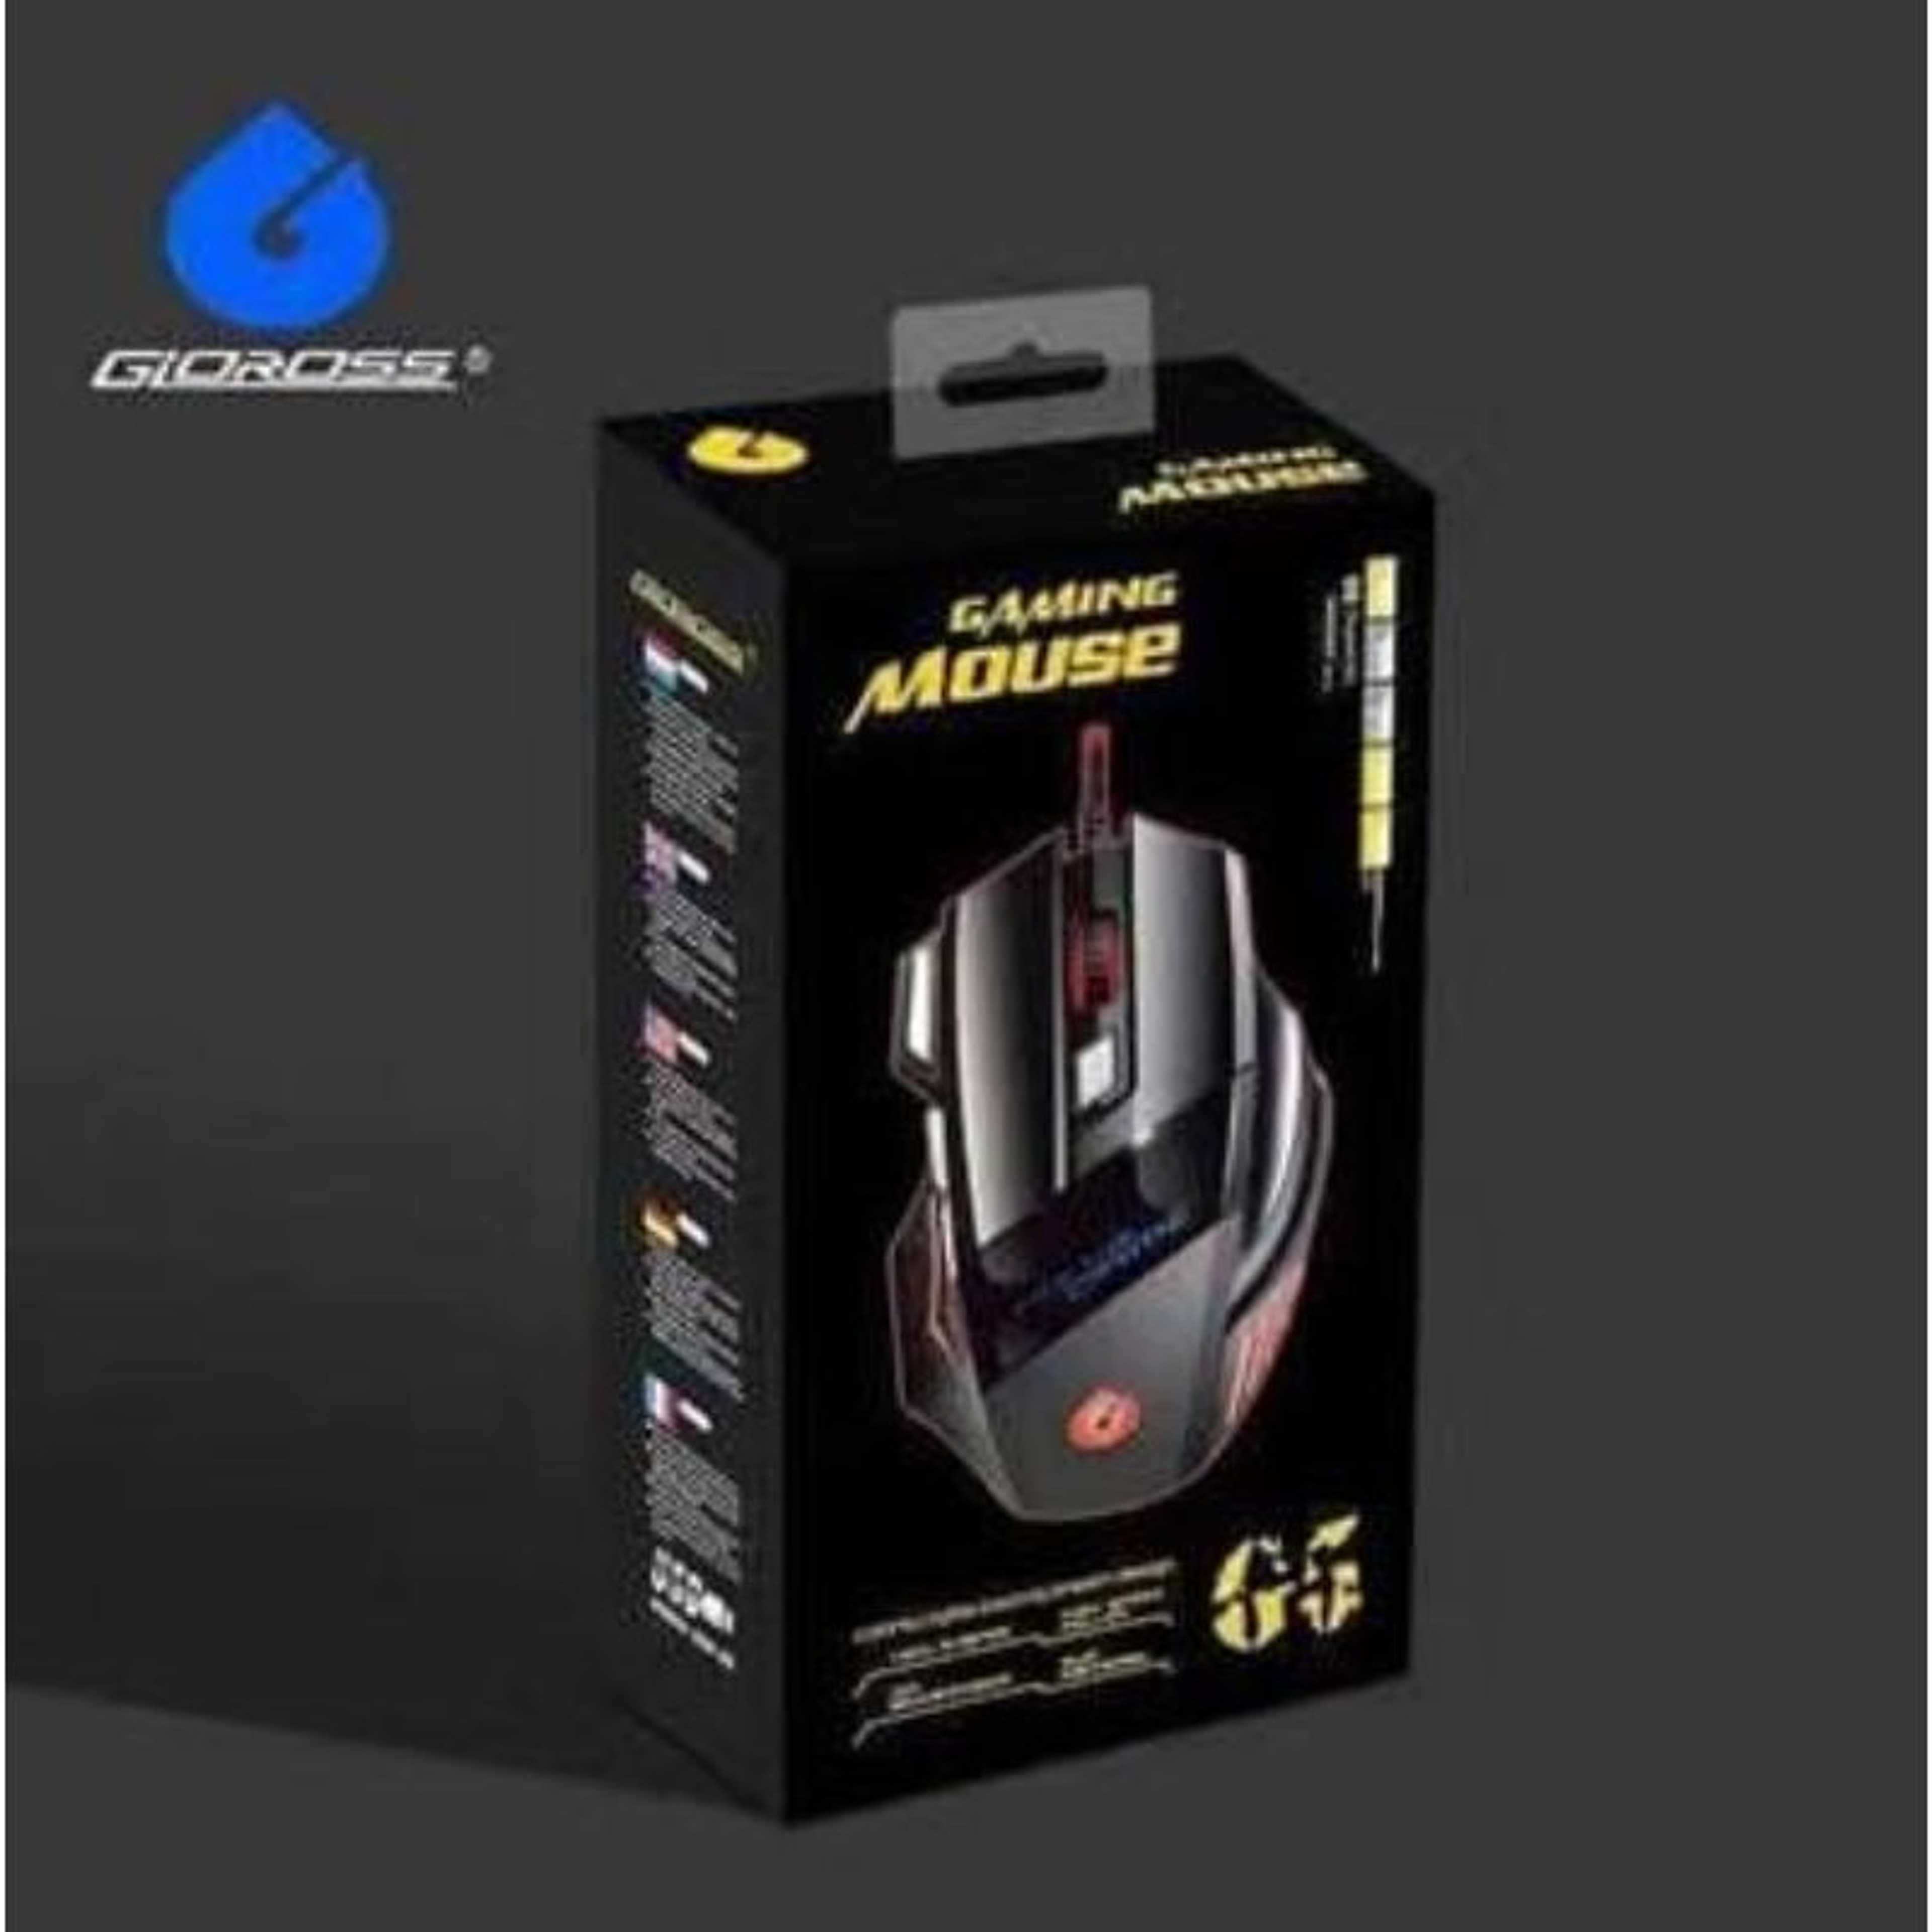 GLOROSS HIGH QUALITY G5 3200 DPI GAMING ATHLETICS MOUSE WITH 7 COLOR